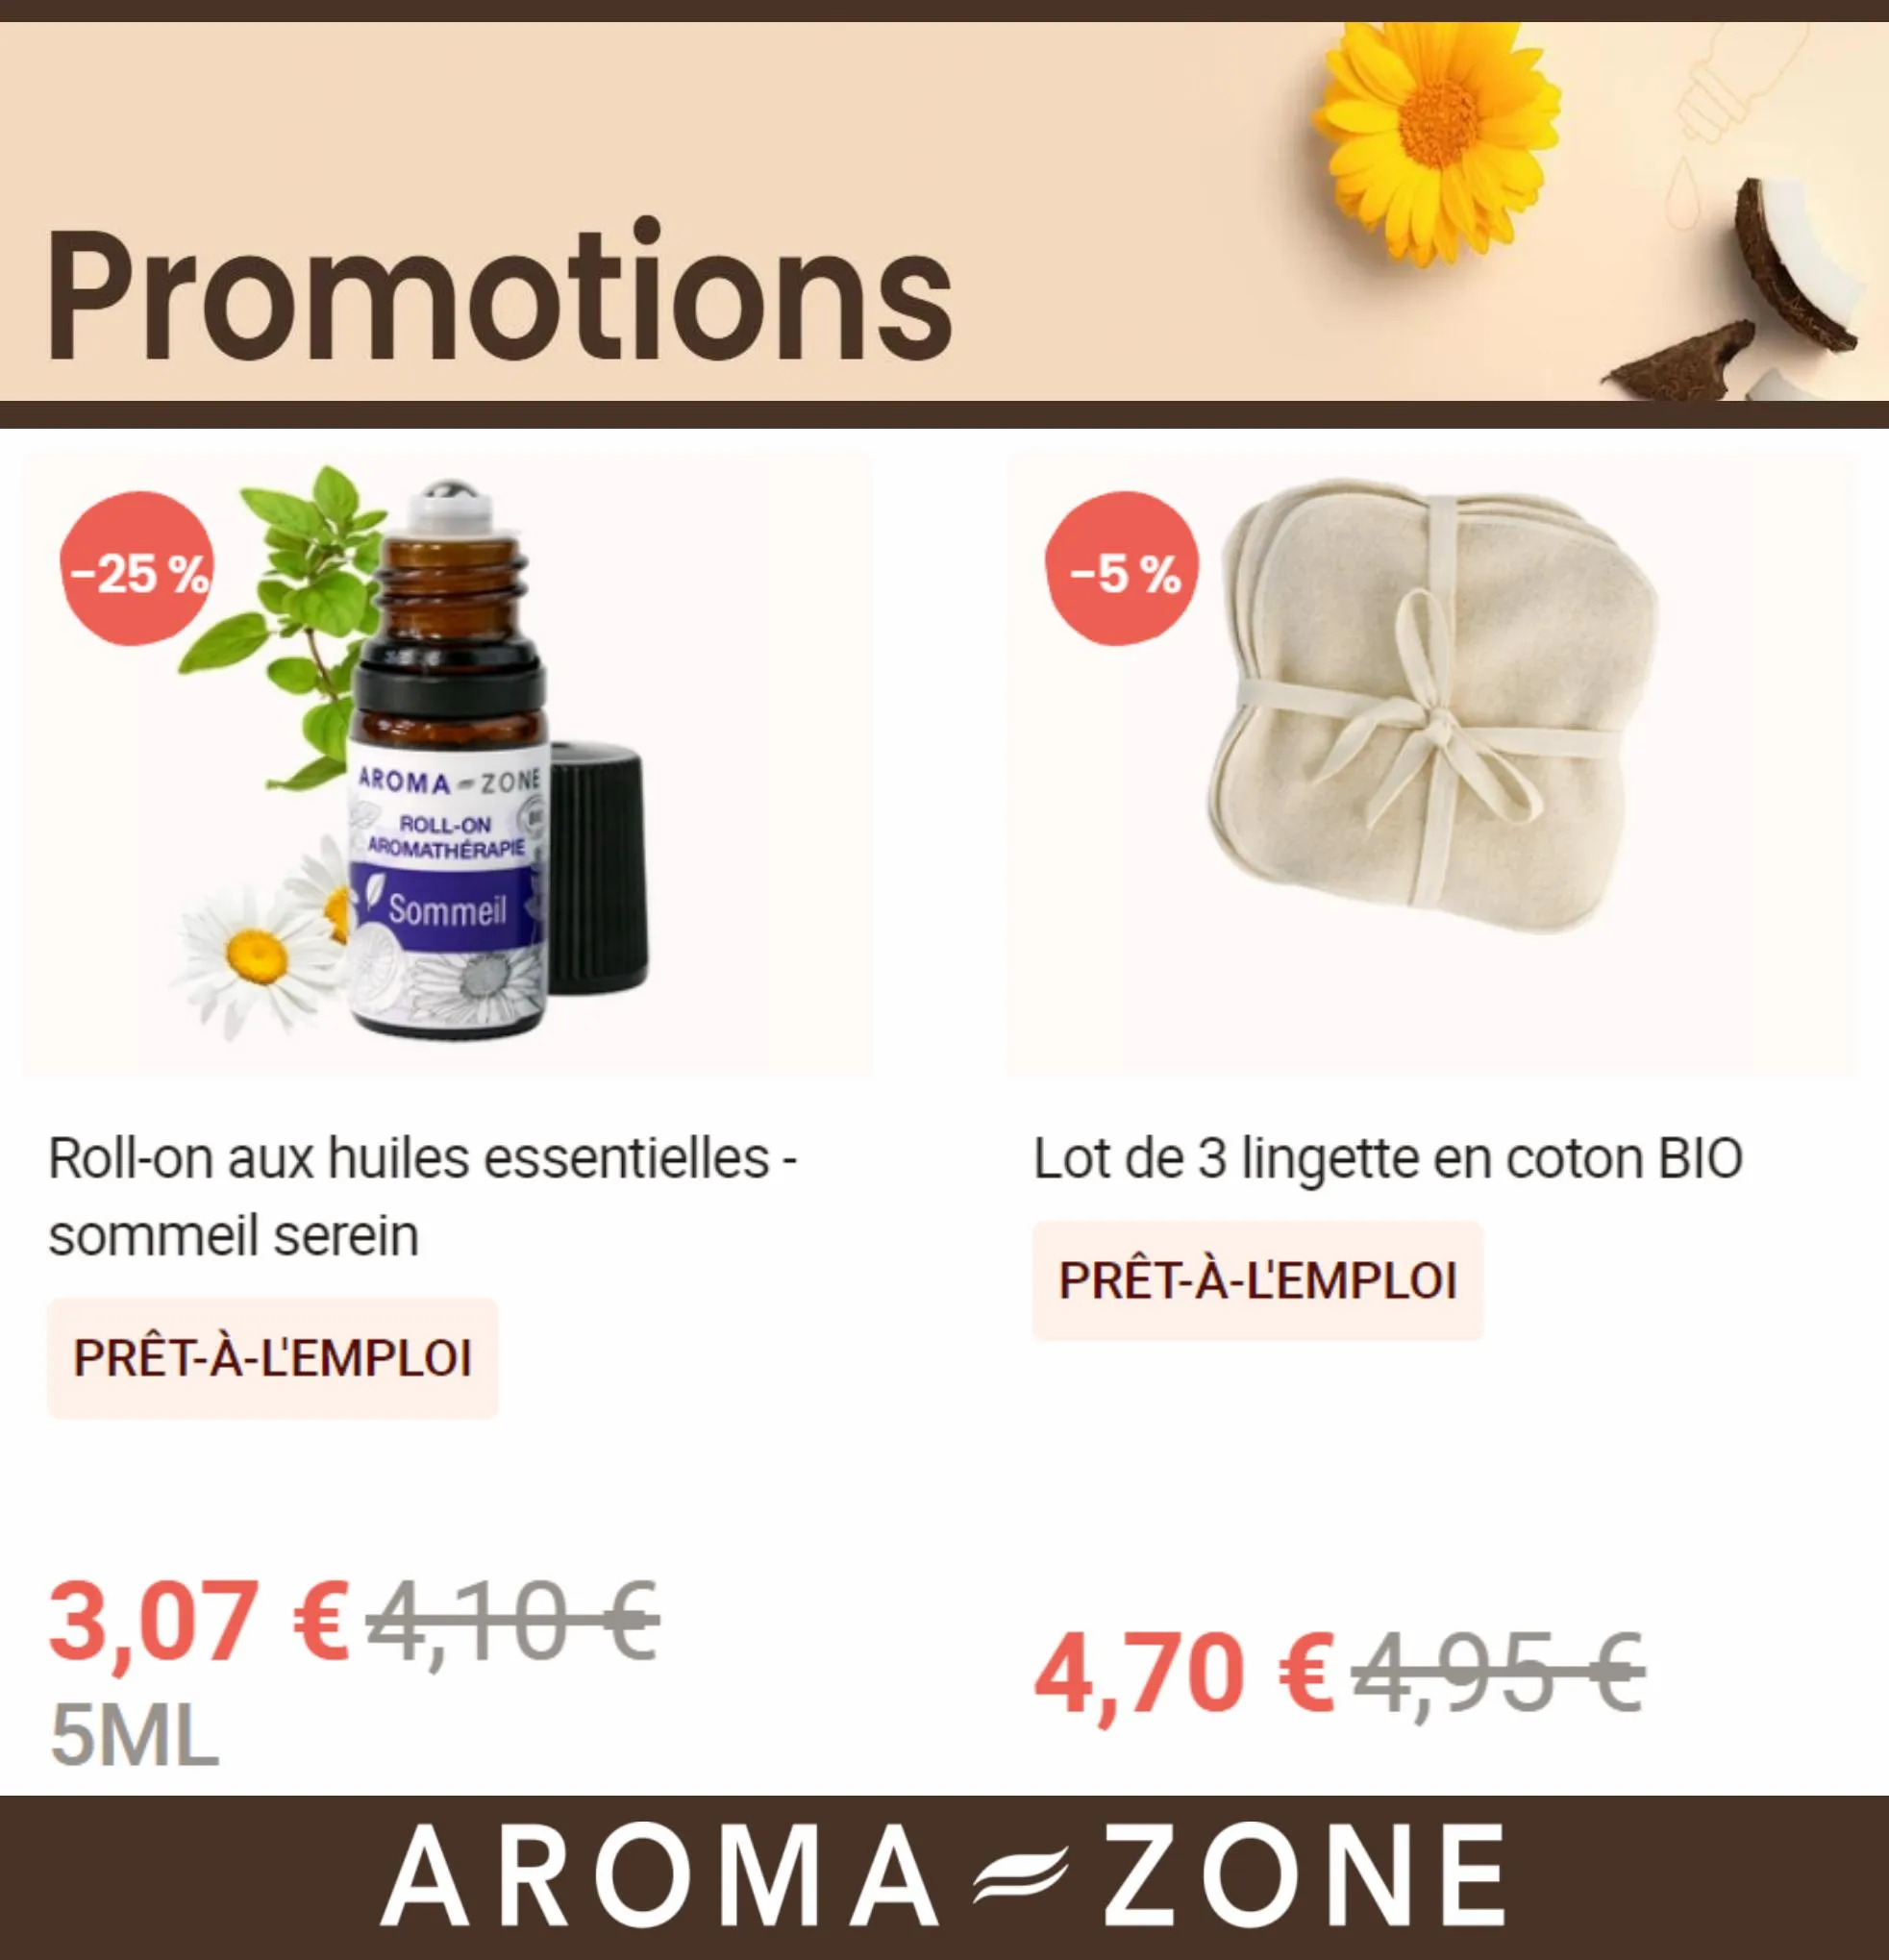 Catalogue Aroma Zone Promotions, page 00003